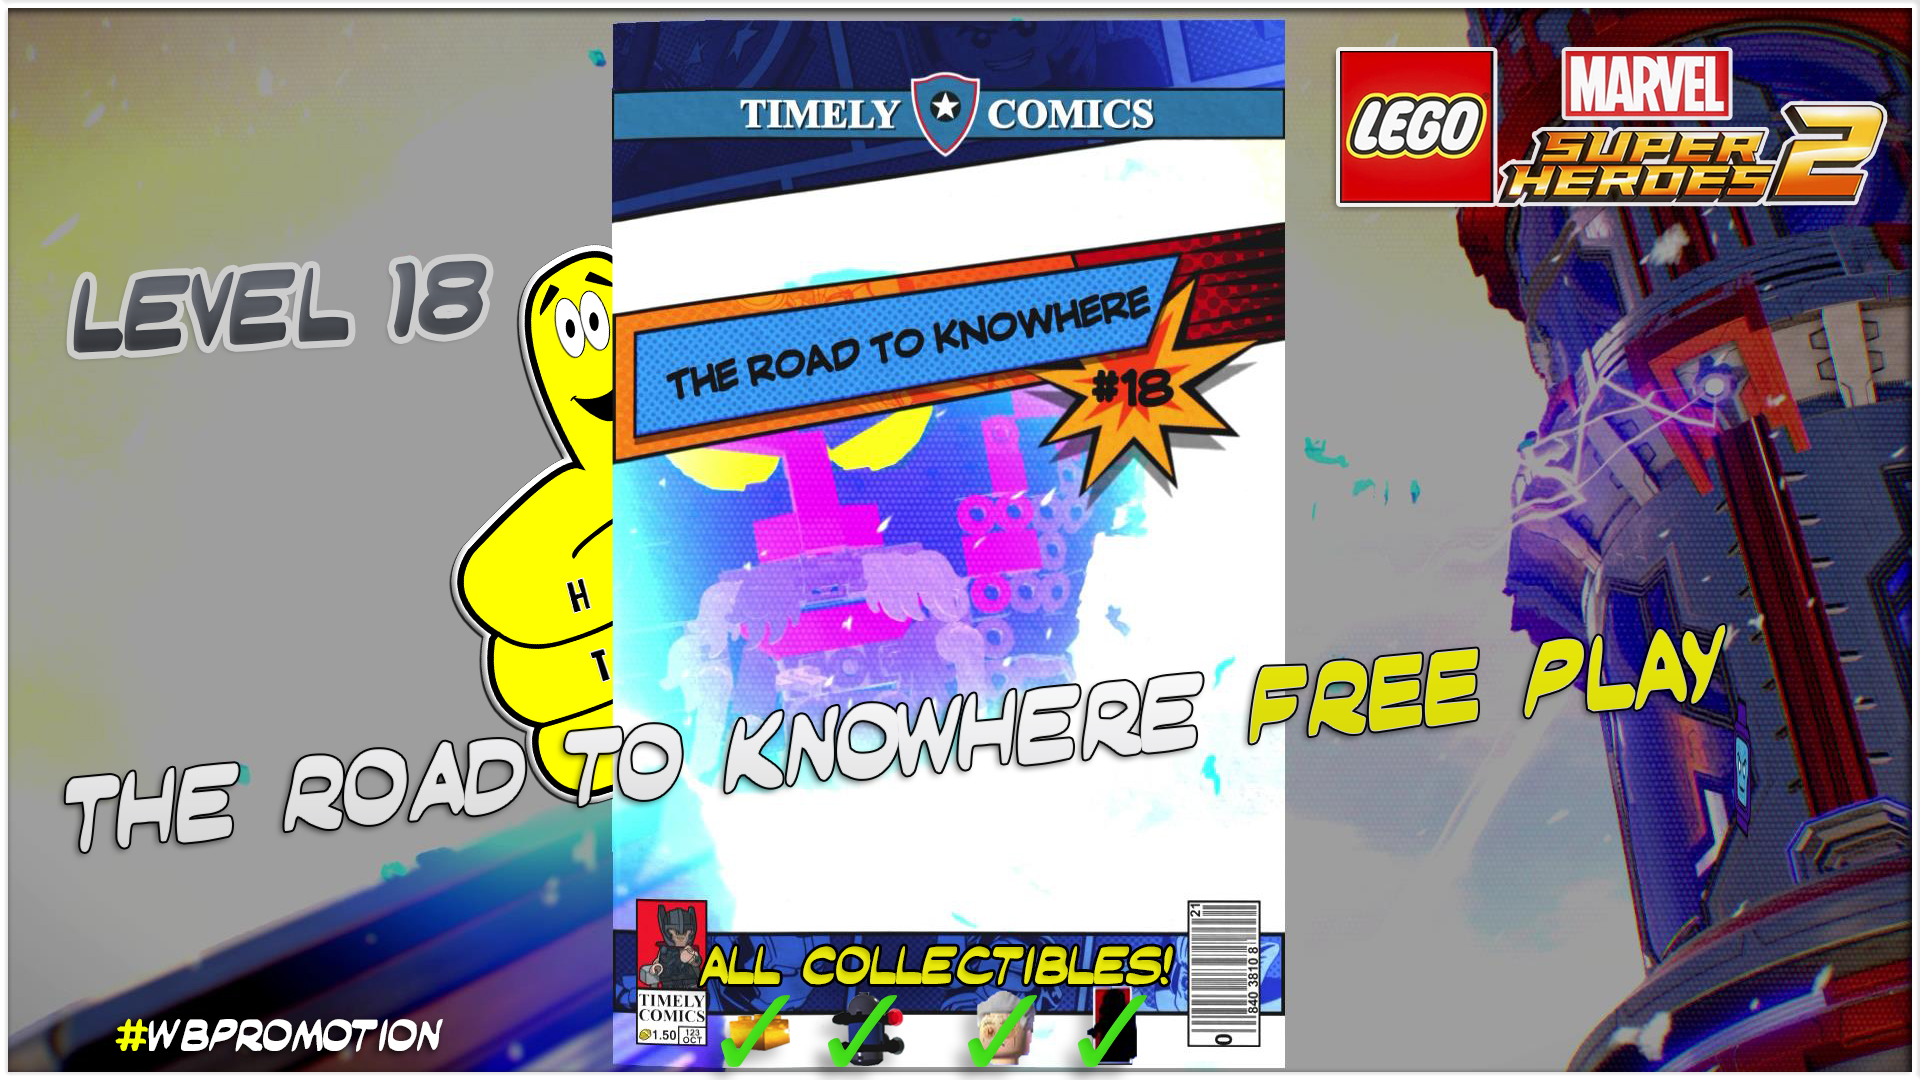 Lego Marvel Superheroes 2: Level 18 / The Road To Knowhere FREE PLAY (All Collectibles) – HTG